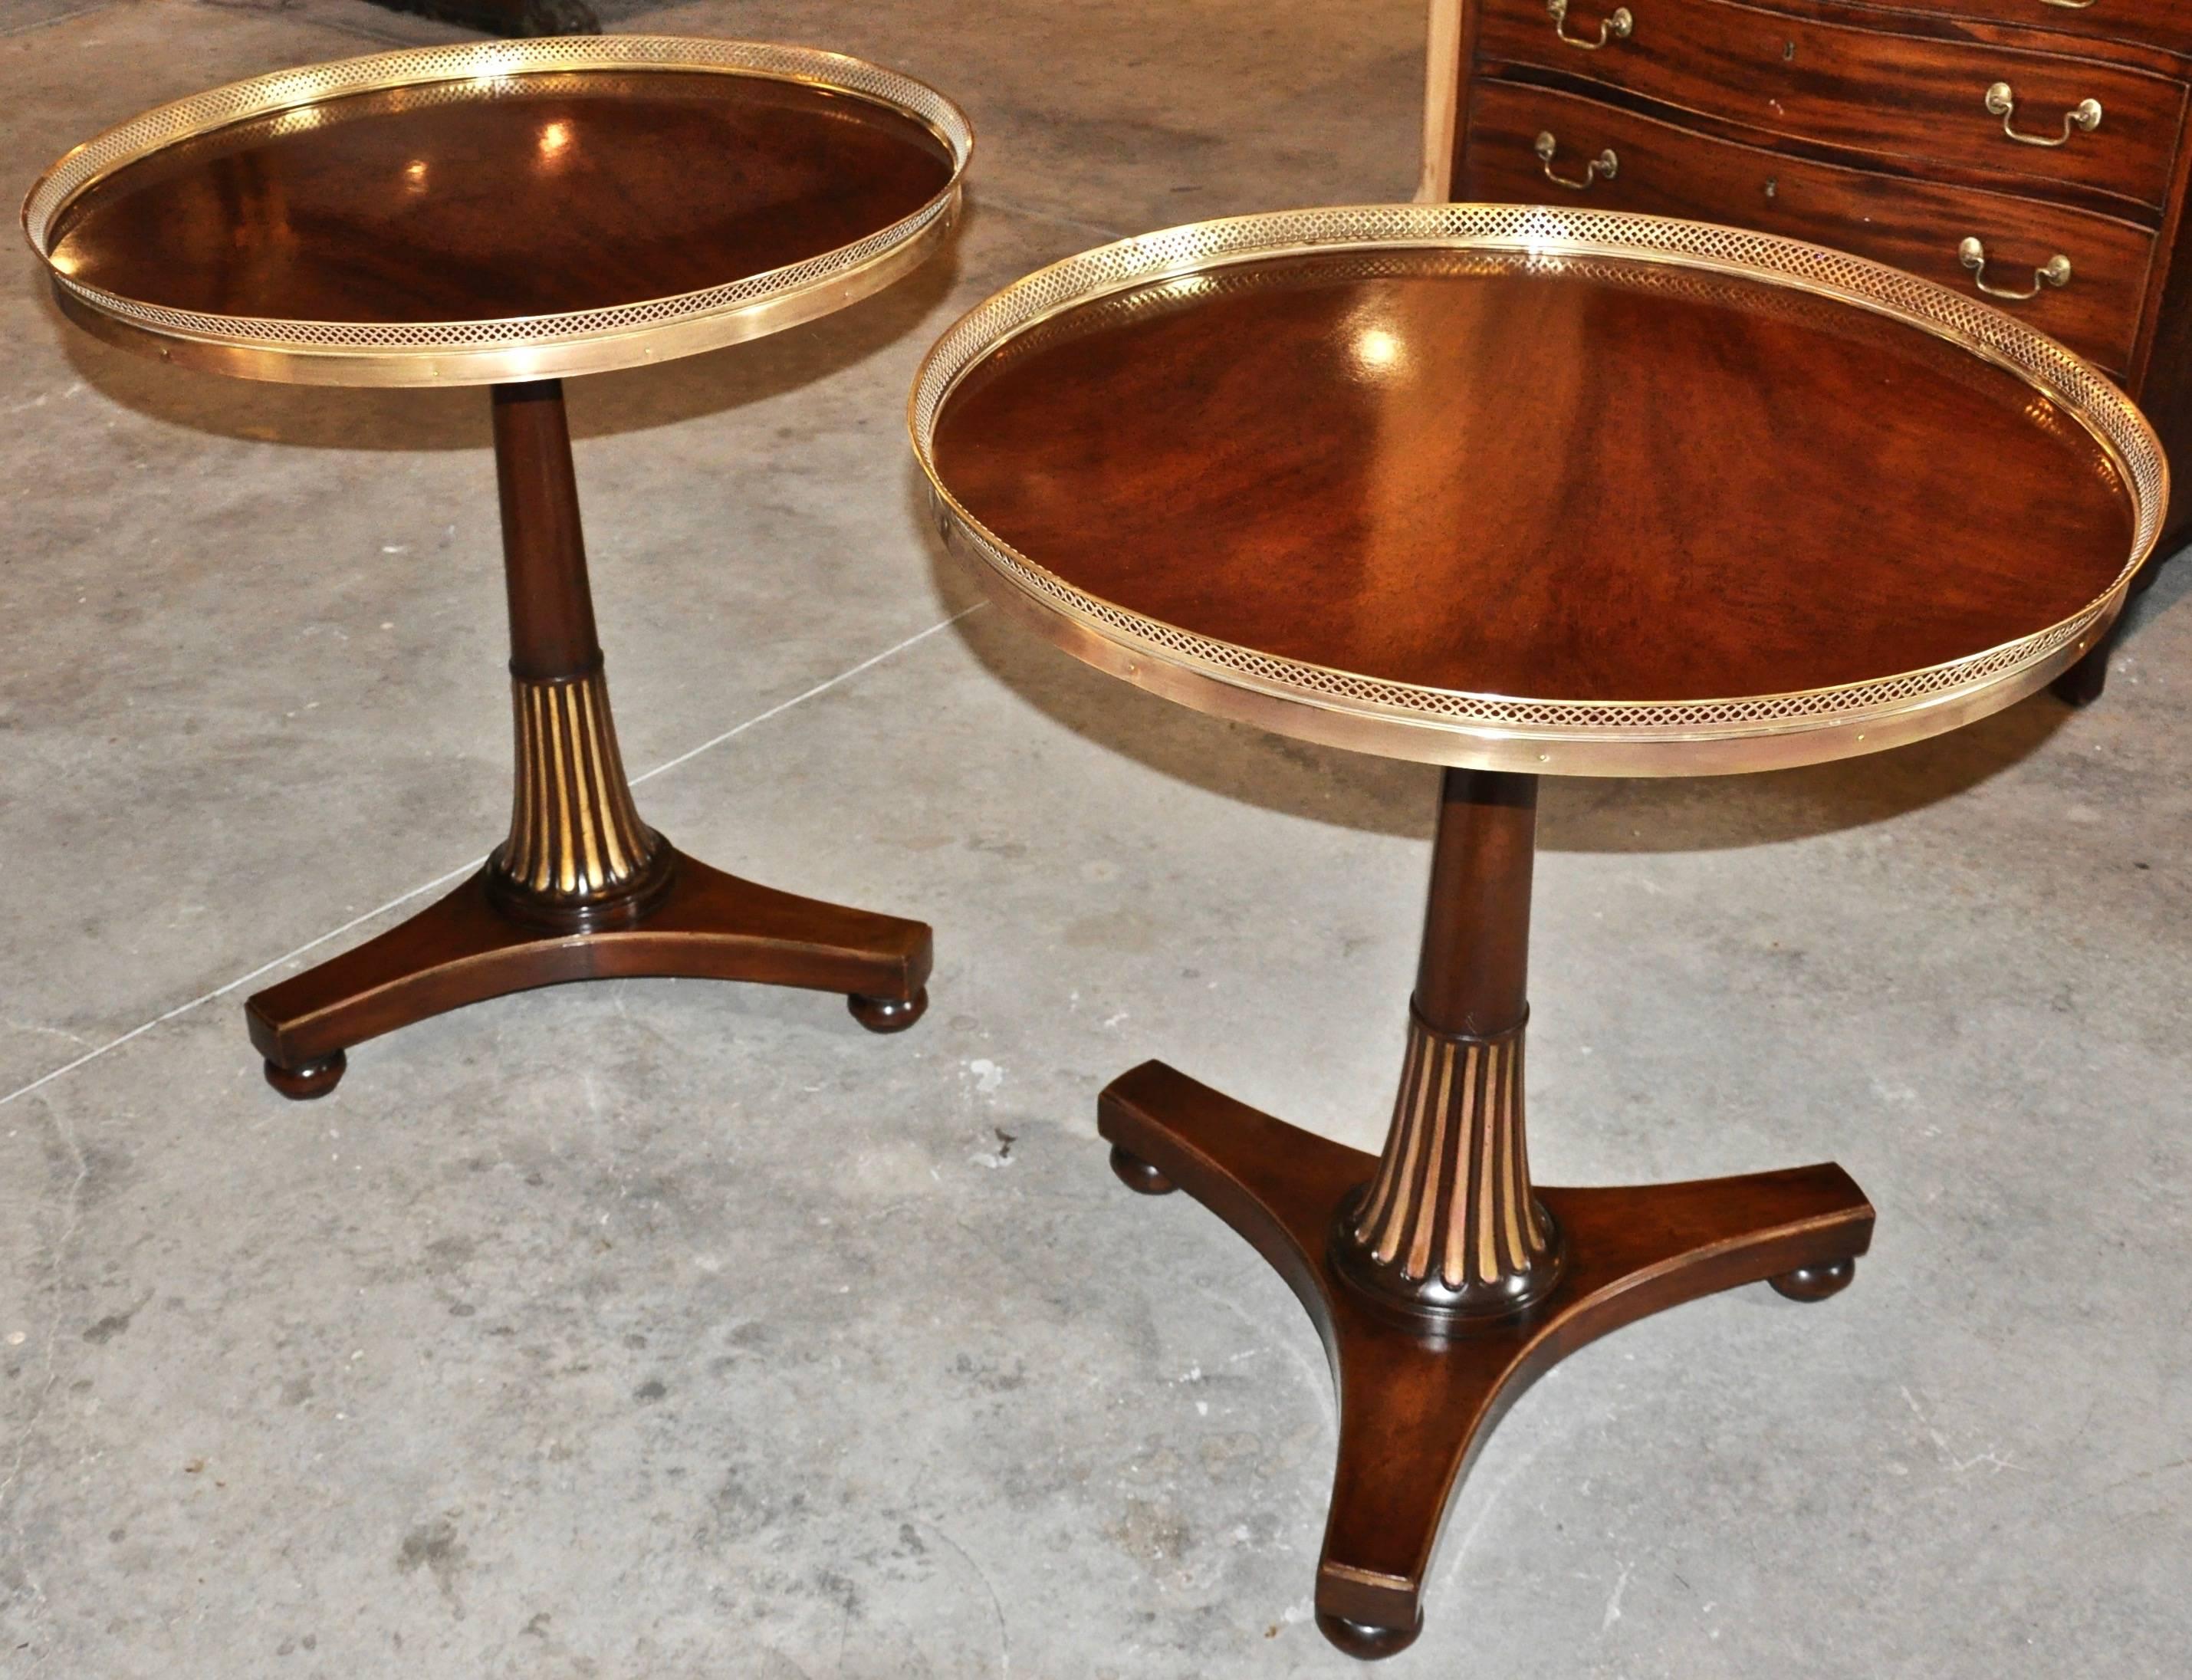 American Pair of Midcentury Regency Style Mahogany Side Tables with Brass Gallery